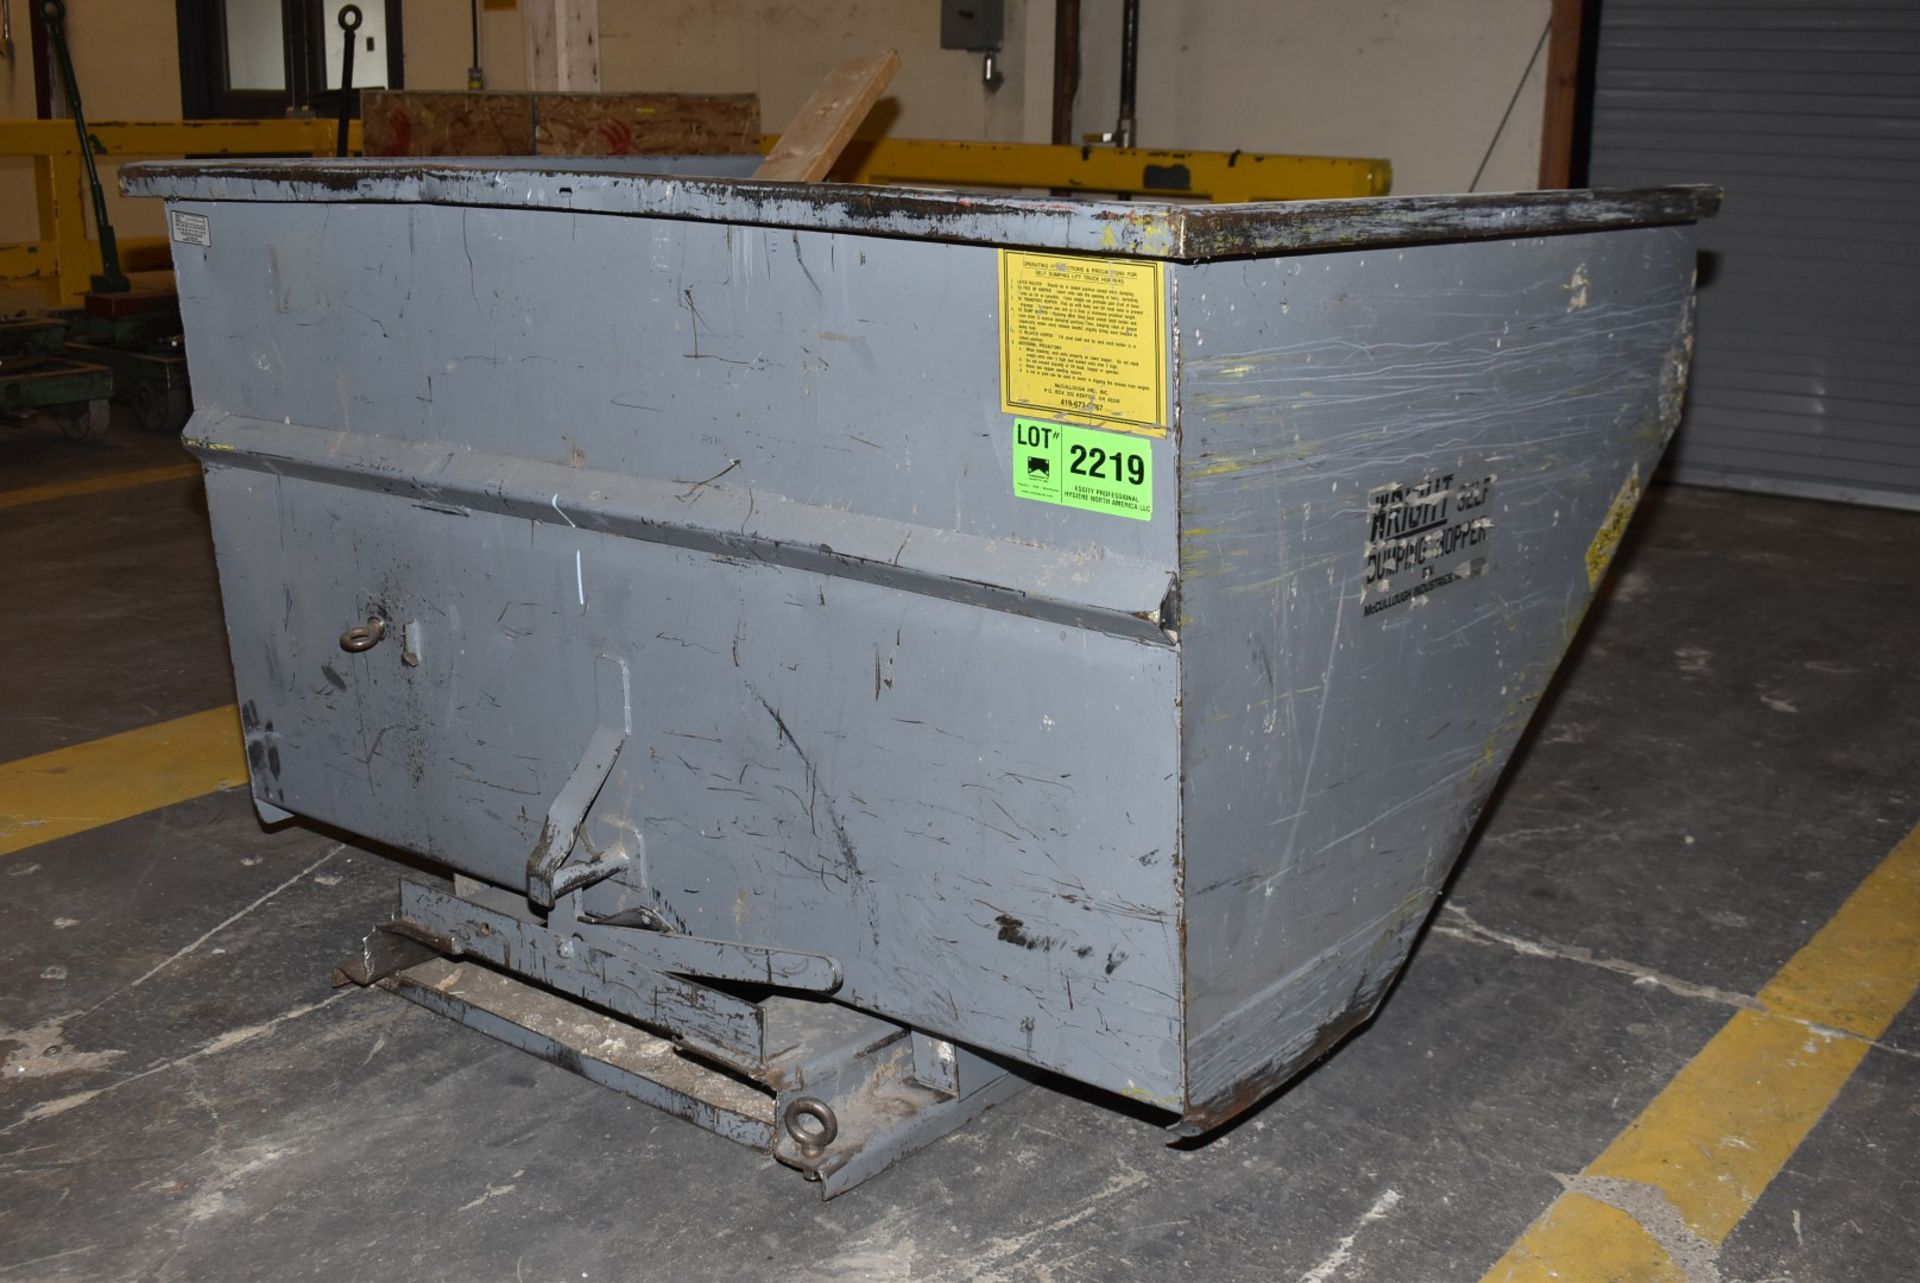 WRIGHT LARGE CAPACITY SELF DUMPING HOPPER [RIGGING FEES FOR LOT #2219 - $25 USD PLUS APPLICABLE